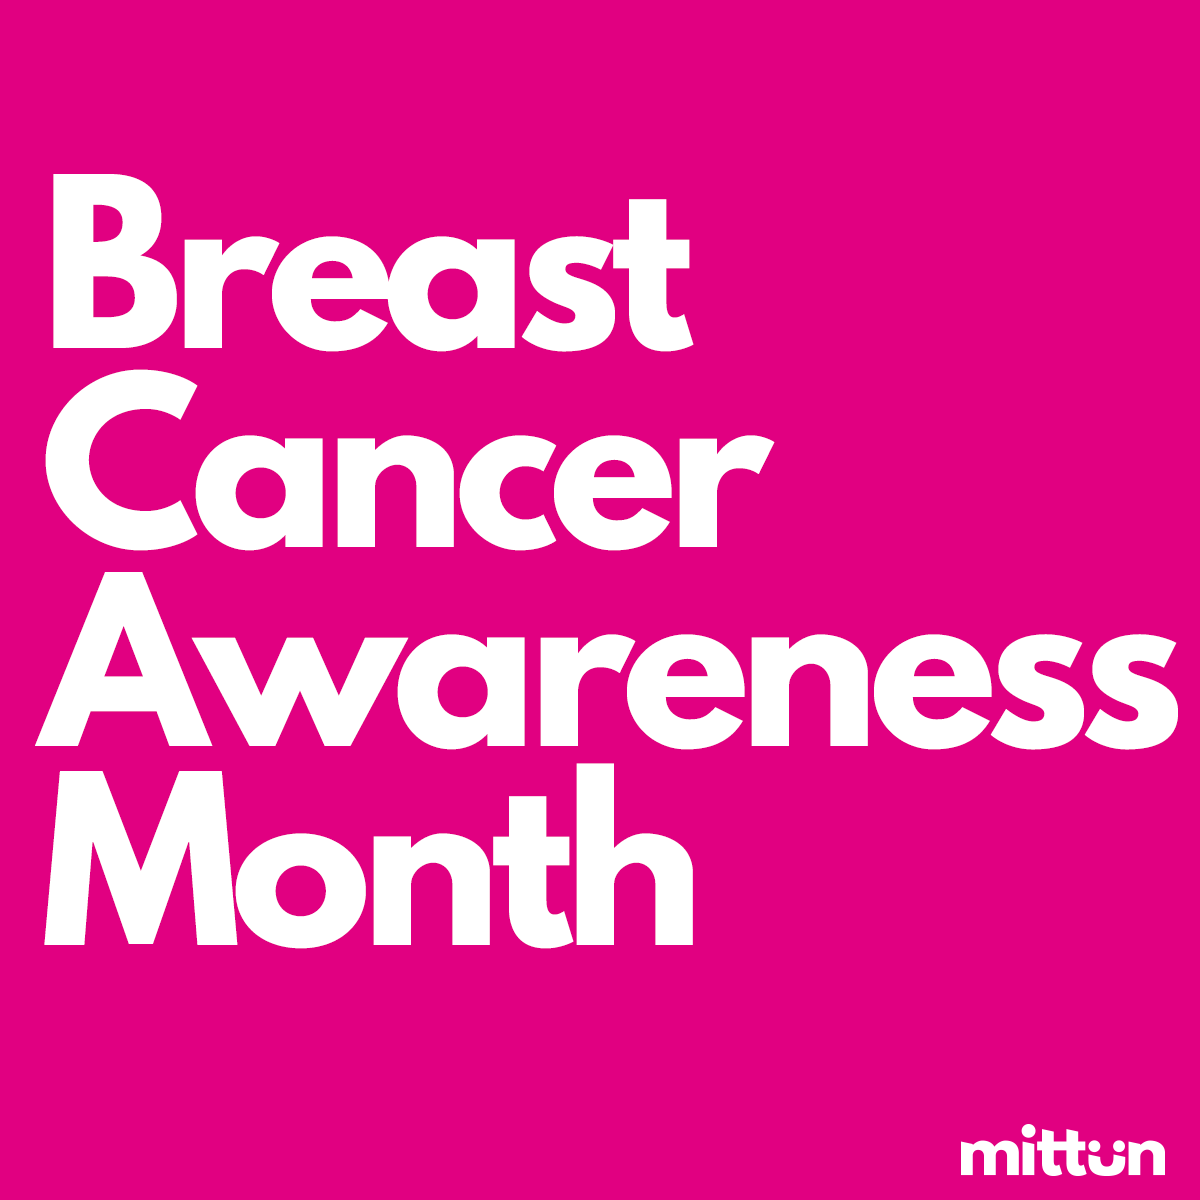 Breast cancer awareness month graphic - by mittun